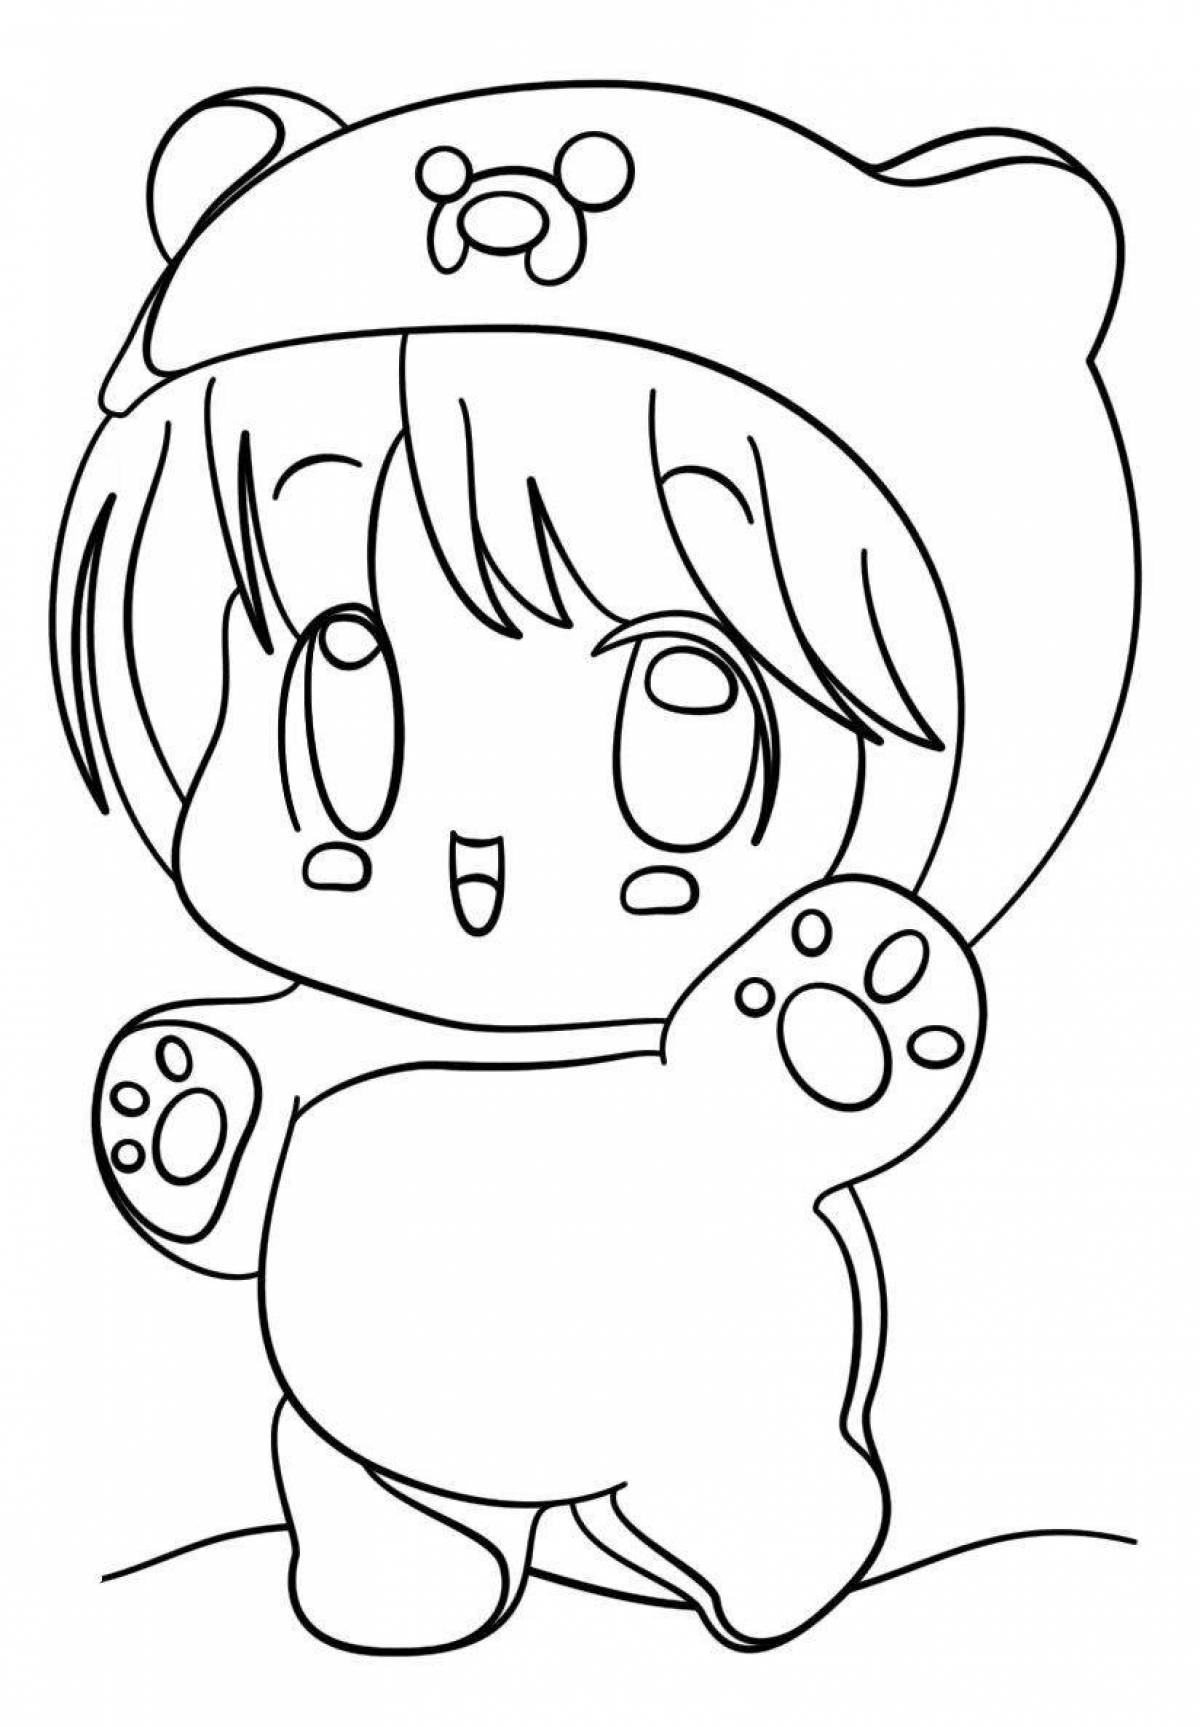 Wonderful coloring pages cute stickers for girls